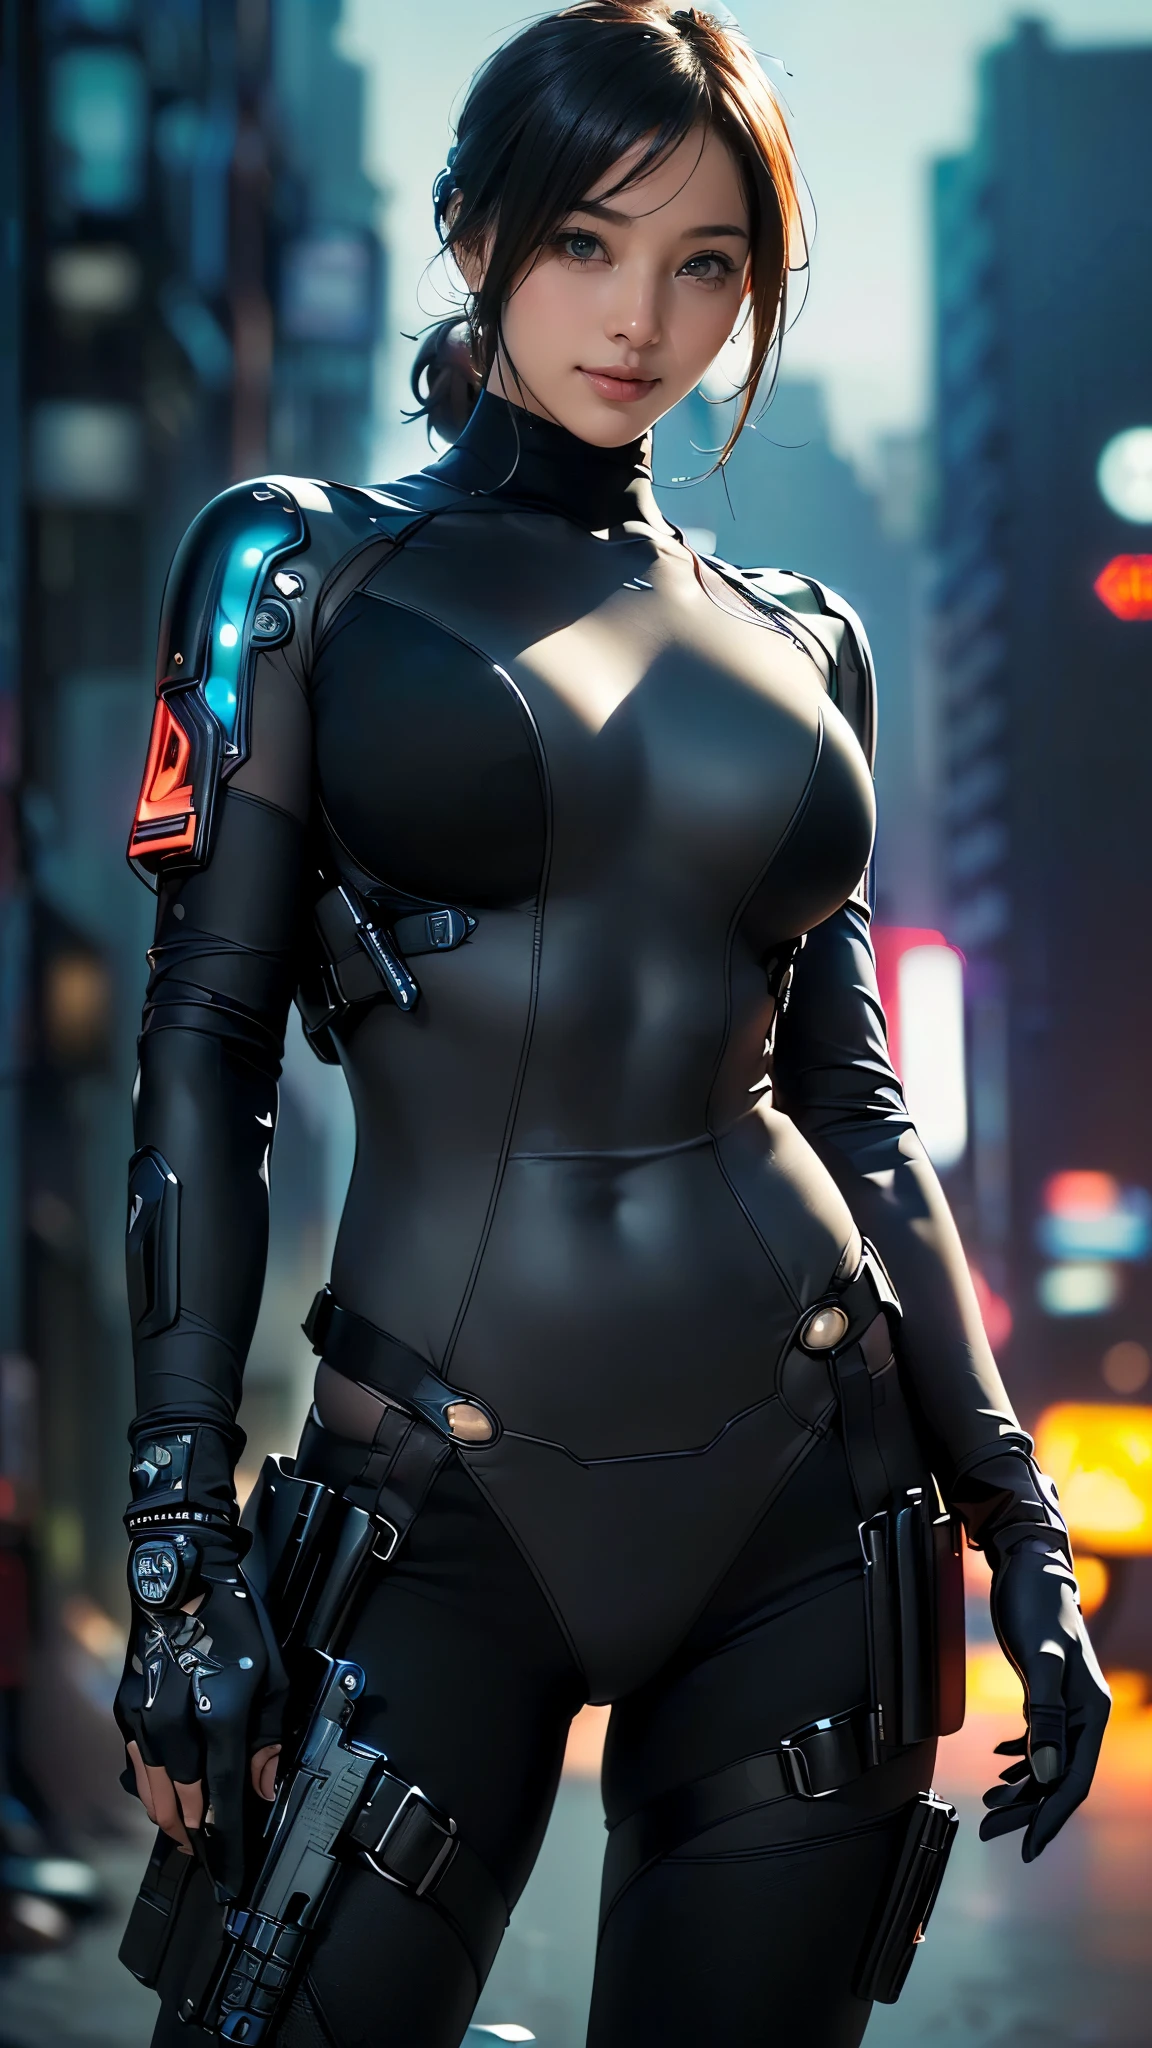 (One Woman),(((A SWAT woman is standing))),((Black tactical bodysuit:1.5)),((Scouter:1.5)),((black tactical holster:1.5)),(Black Gloves:1.5),(smile:1.5),(Short Hair 1.5),(Beautiful Eyes:1.3),(Very detailedな顔:1.5),((Very detailed drawing of a female hand:1.5)),((muscular:1.5)),(Sexy Looks:1.5),((Thick thighs:1.5)),(Beautiful body:1.5),((Very sensual:1.5)),(The background is a futuristic city:1.5),(Cyberpunk atmosphere:1.5),(((Blur the background:1.5))),(Written boundary depth:1.5),BREAK(((masterpiece:1.5),(highest quality:1.5),(Very detailed:1.5),(High resolution:1.5),(Realistic:1.5),(Realistic:1.5),(Delicate depiction),(Careful depiction))),8k,wallpaper